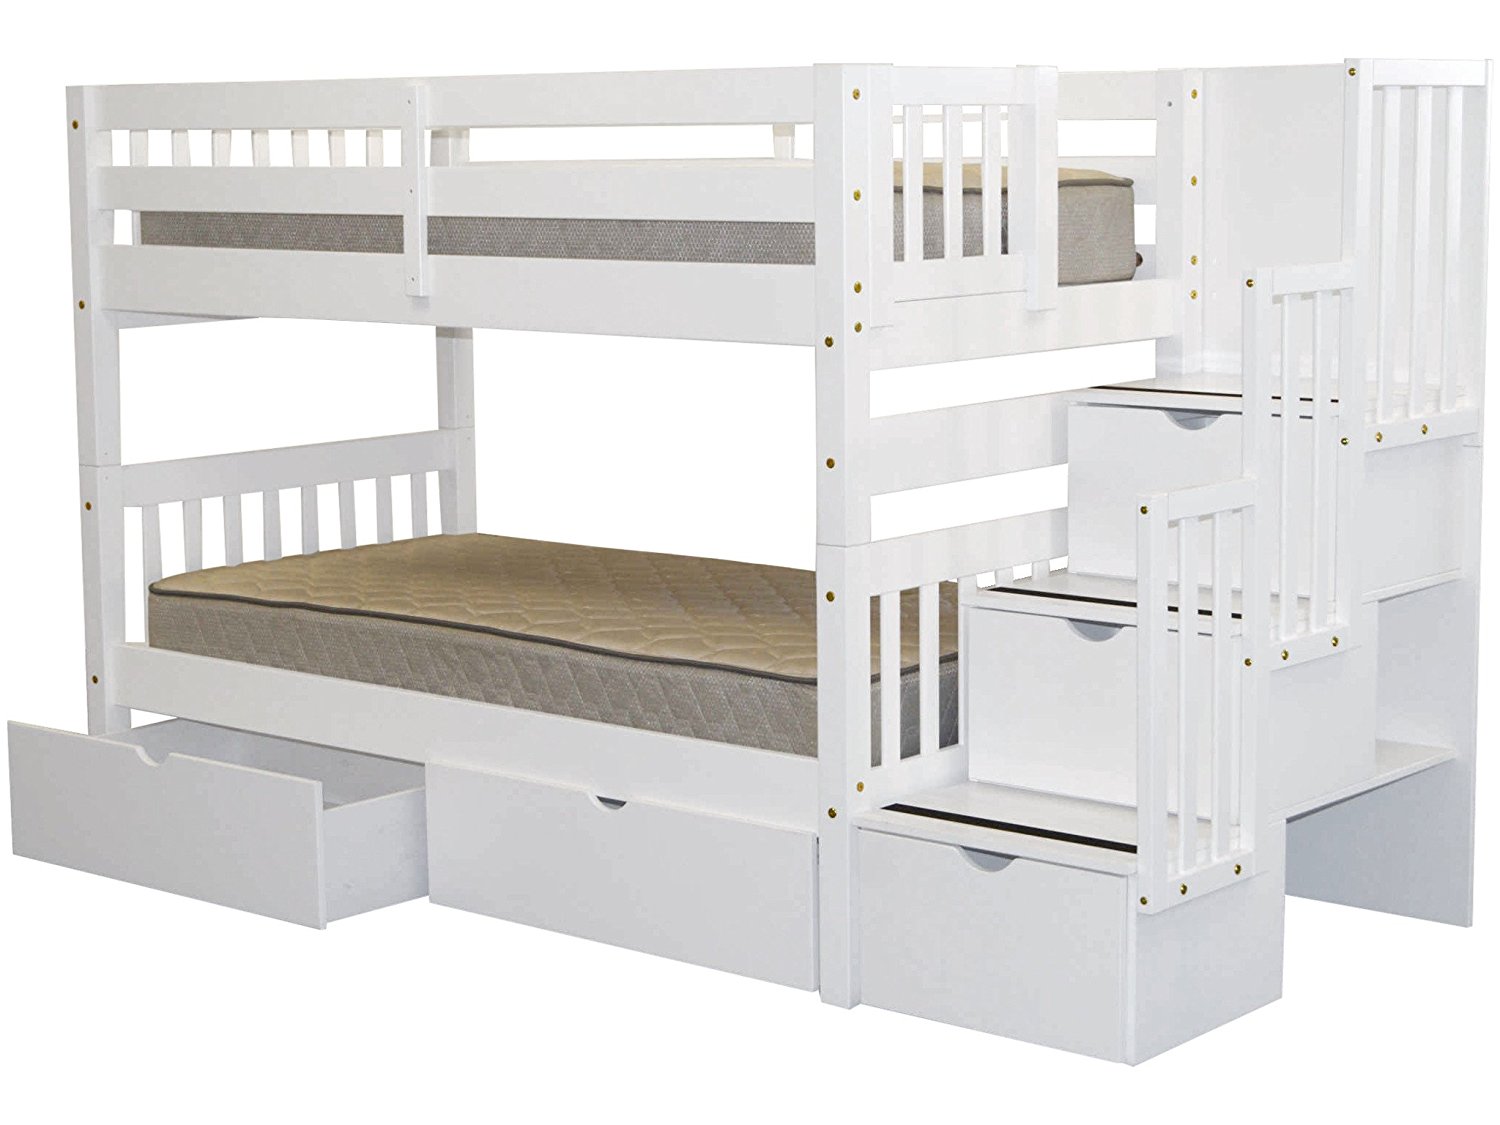 Bedz King Stairway Bunk Bed Twin over Twin with 3 Drawers in the Steps and 2 Under Bed Drawers, White